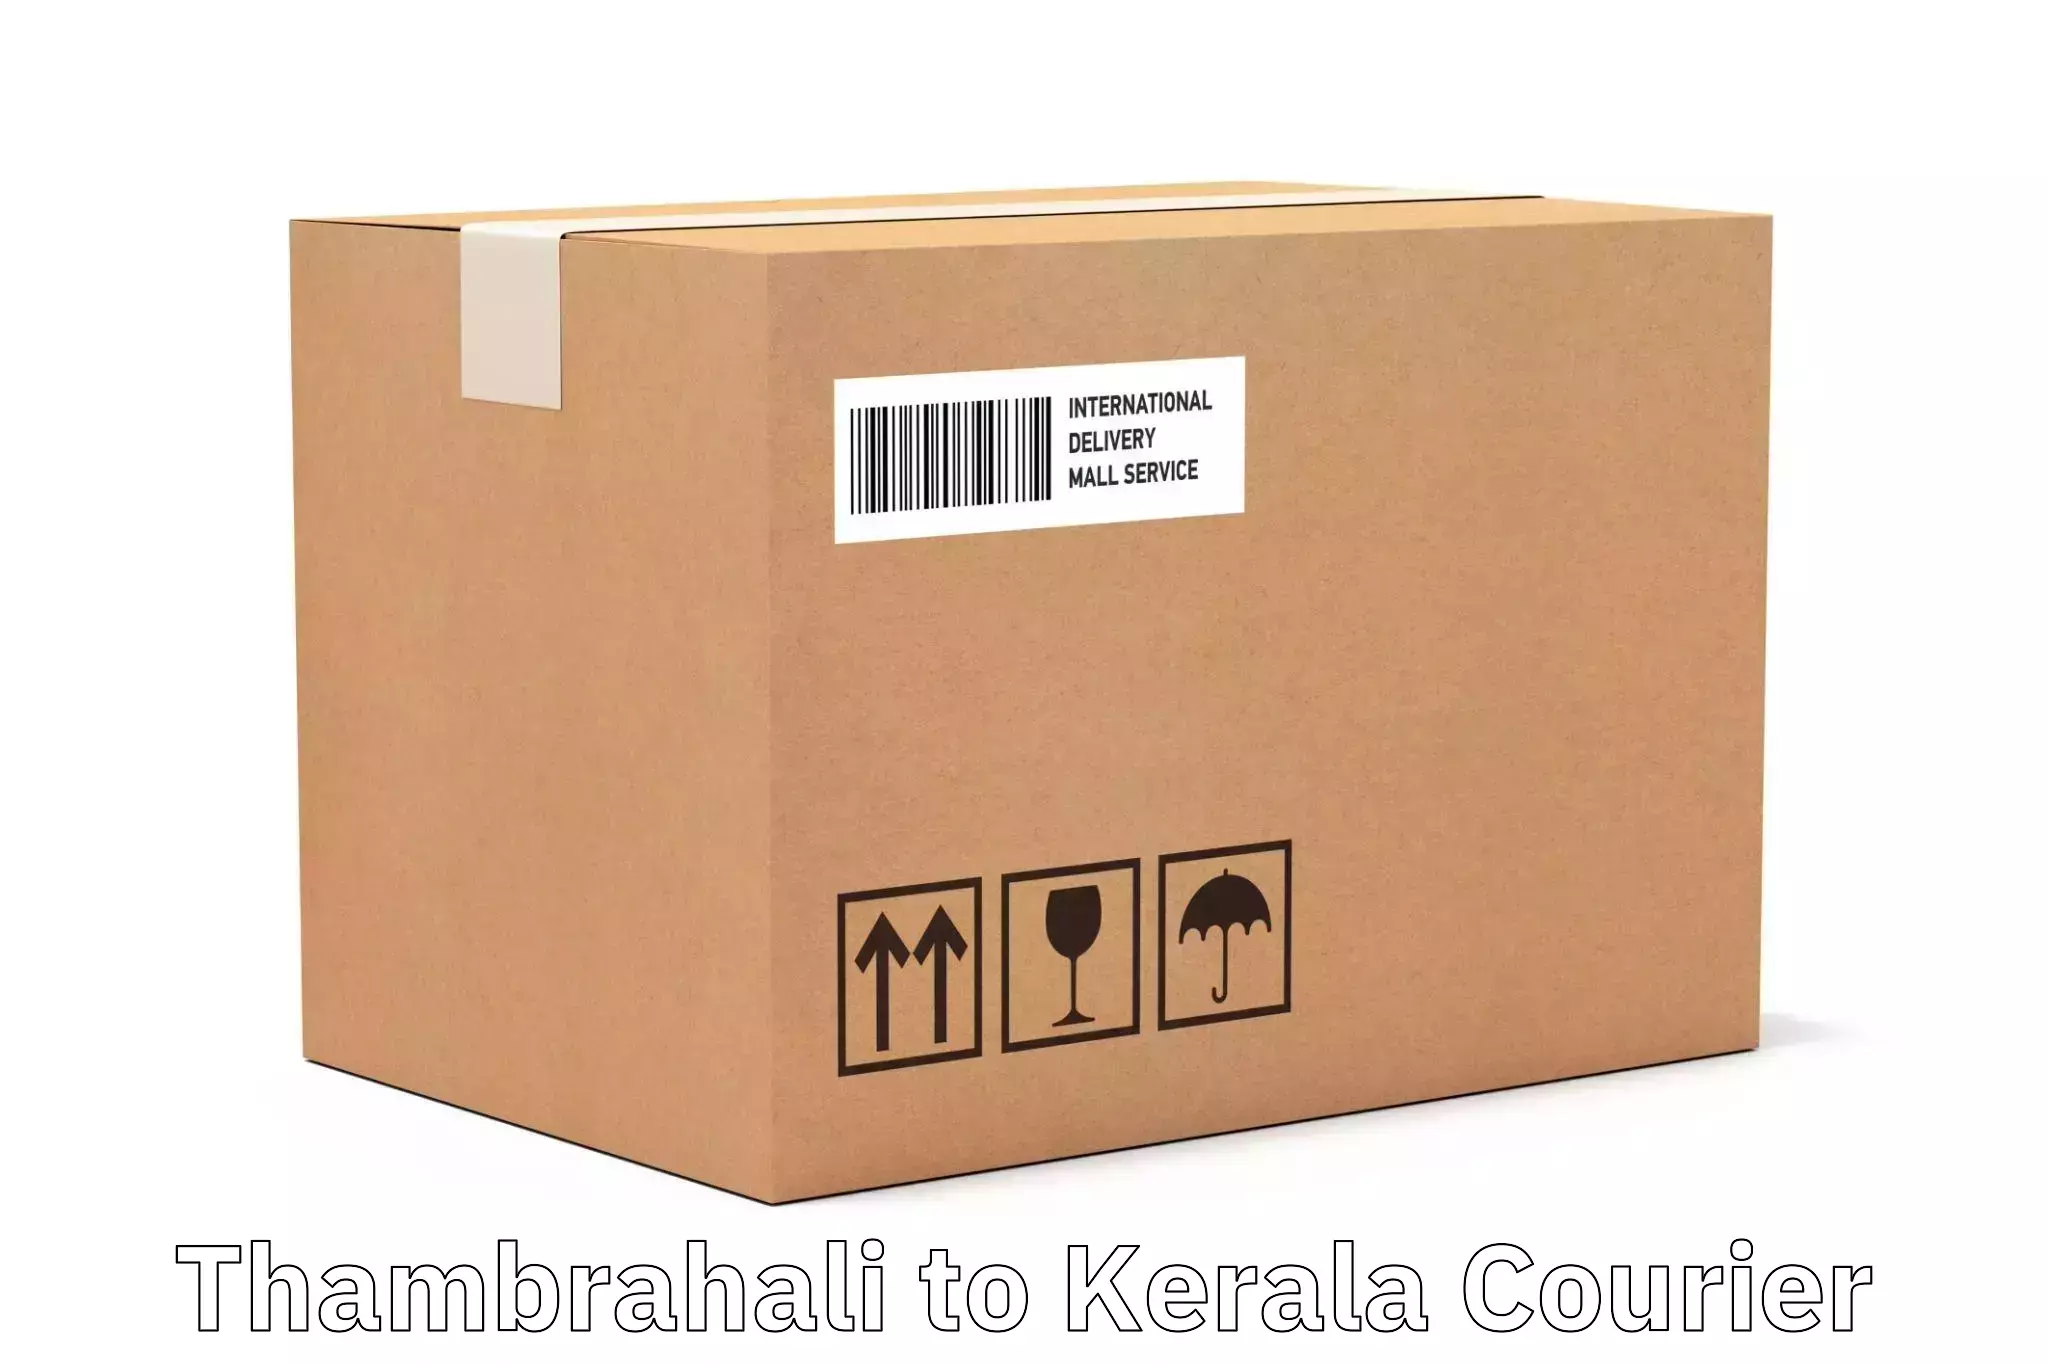 Courier service innovation Thambrahali to Ottapalam